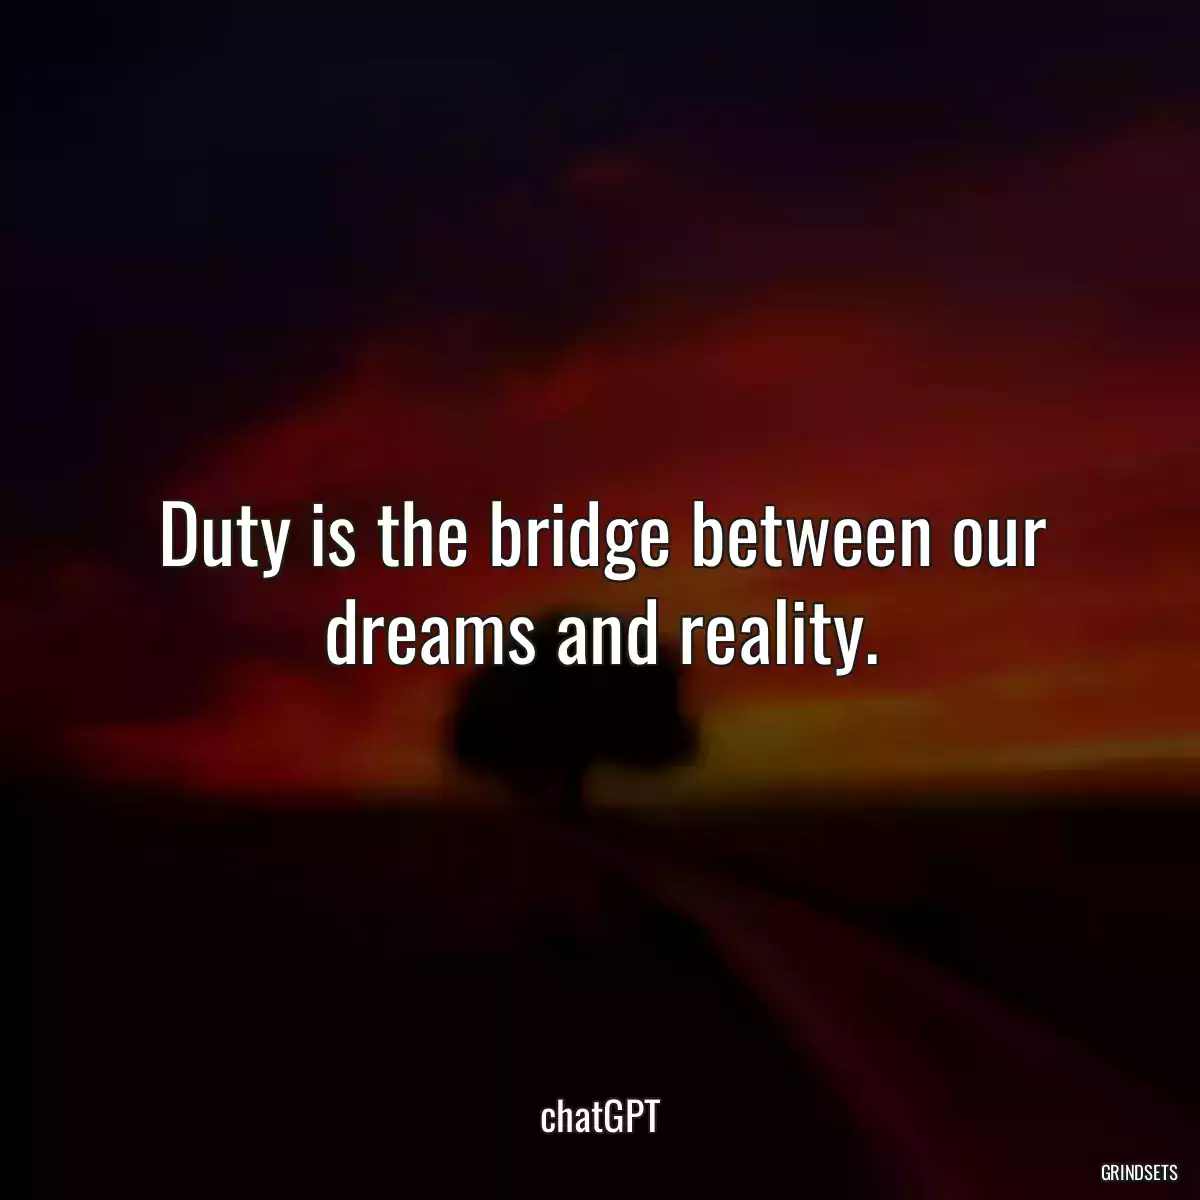 Duty is the bridge between our dreams and reality.